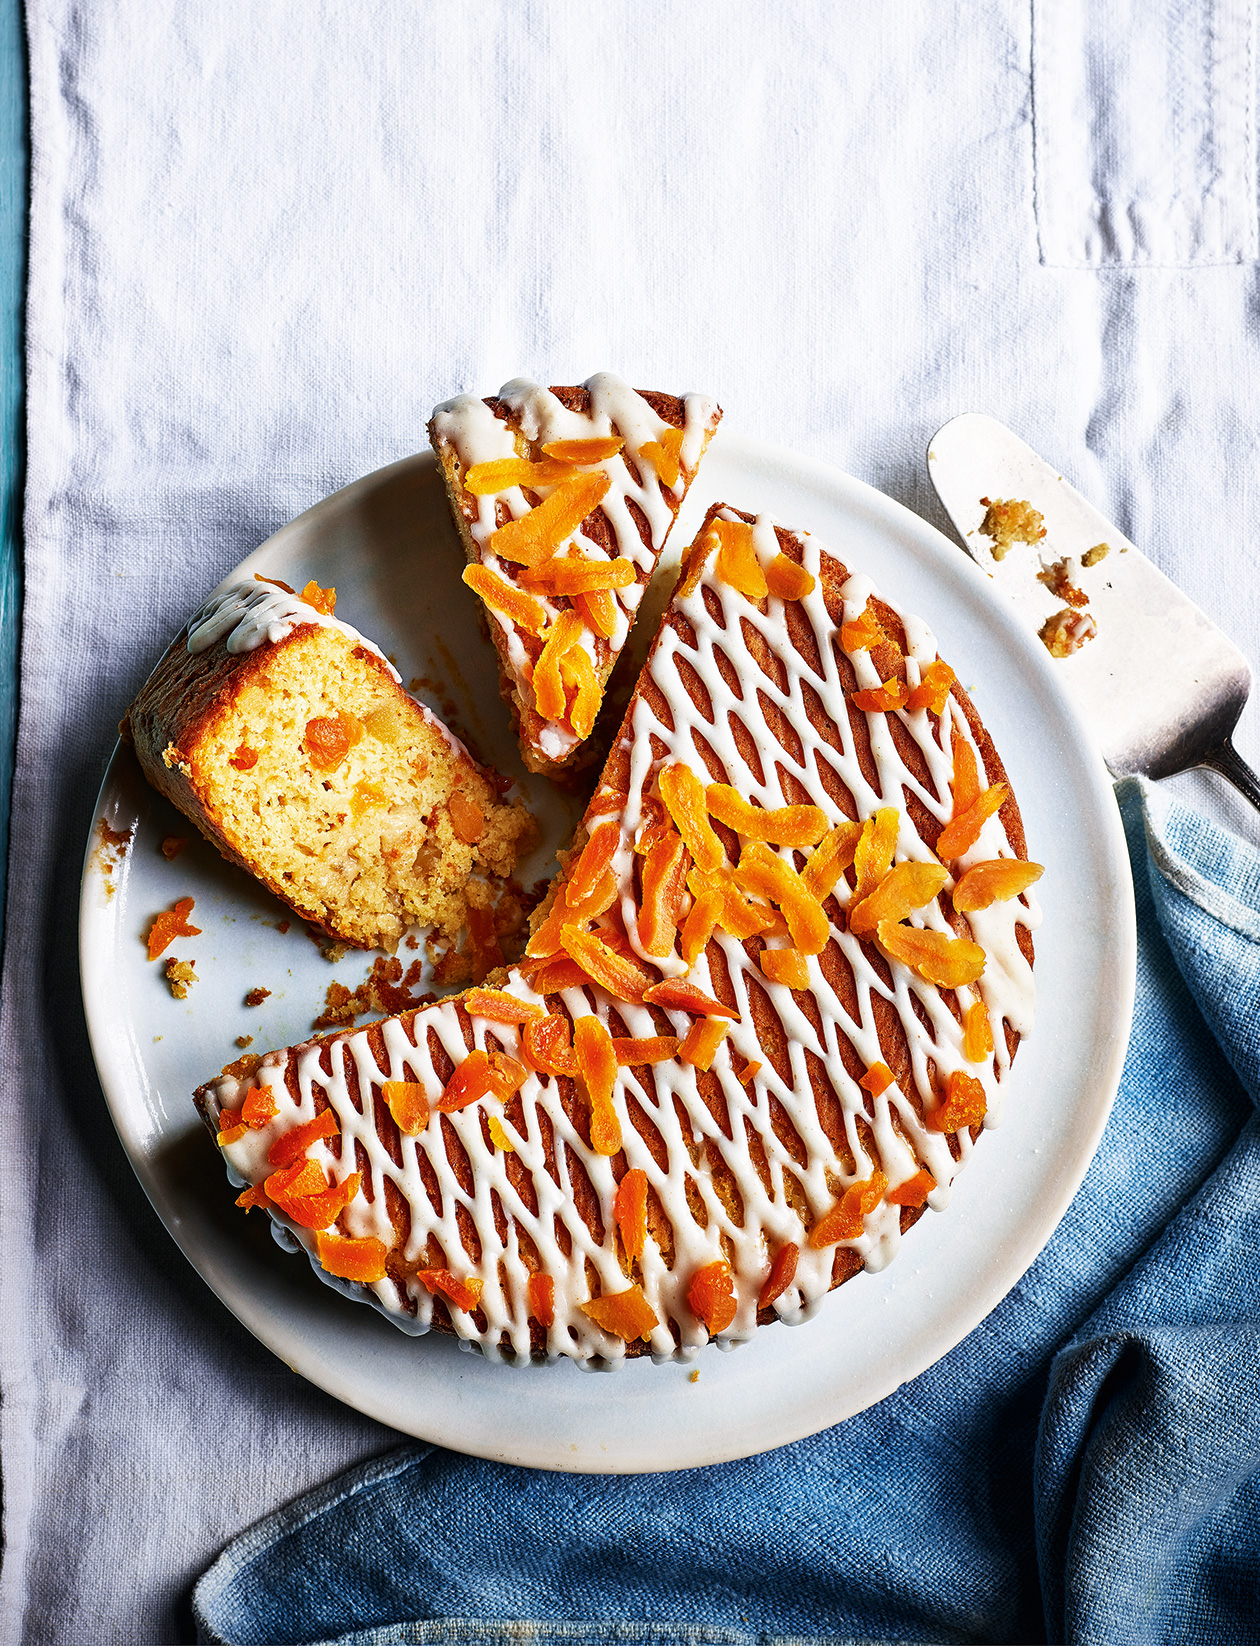 Dried apricot cake - Thermomix Recipes | ThermoRecipes